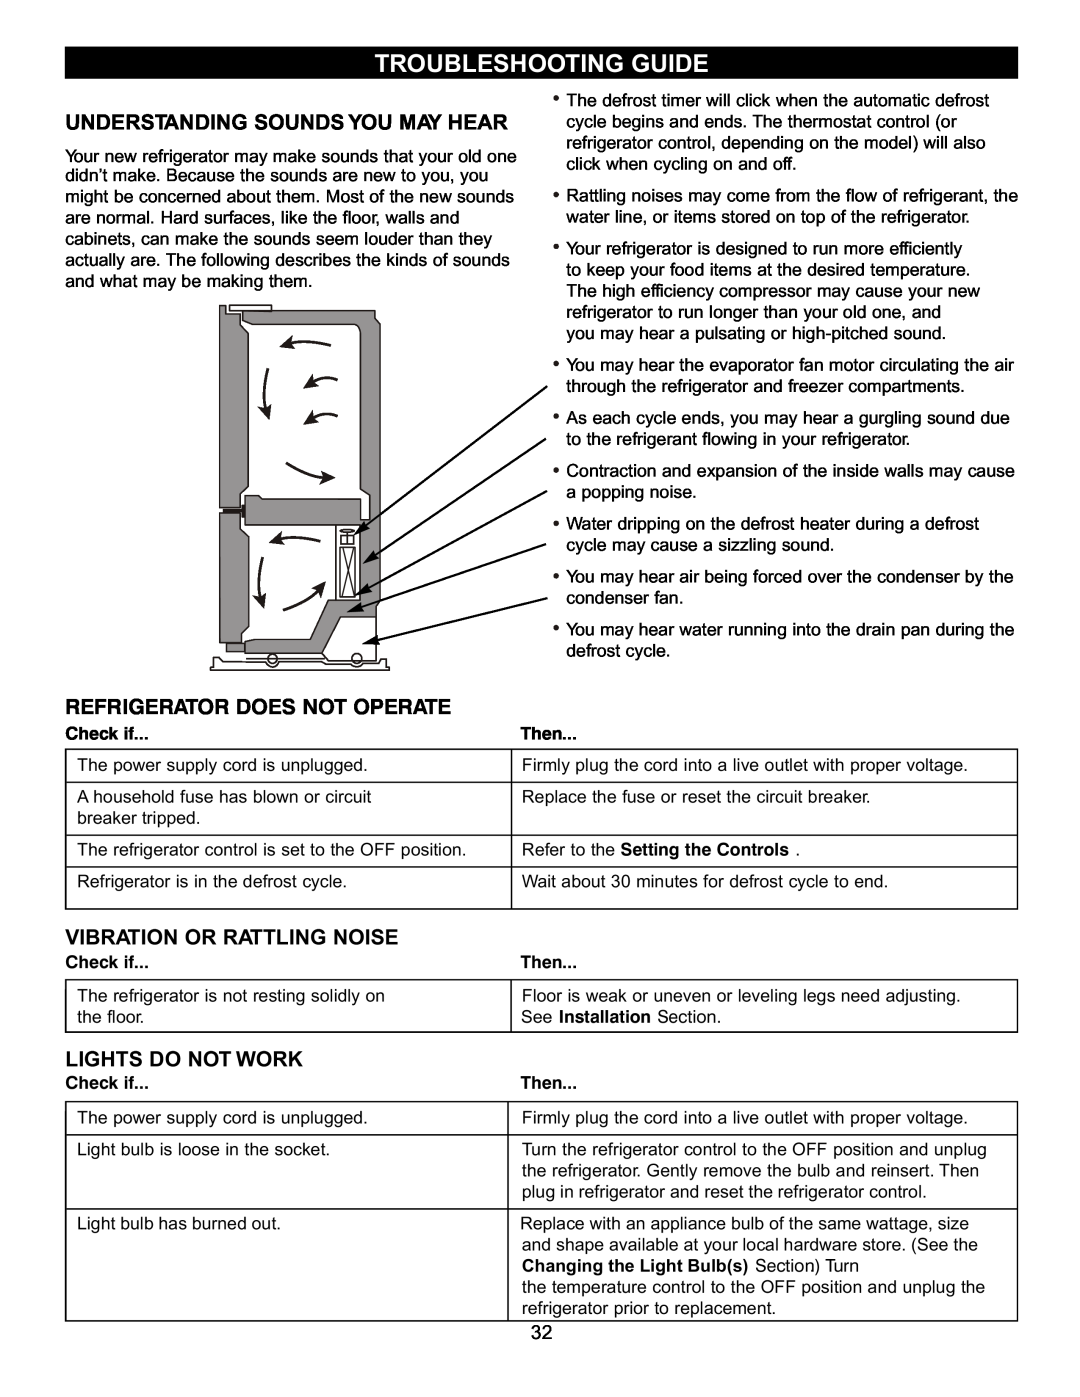 LG Electronics LFC22740 Troubleshooting Guide, Understanding Sounds You May Hear, Refrigerator Does Not Operate, Check if 